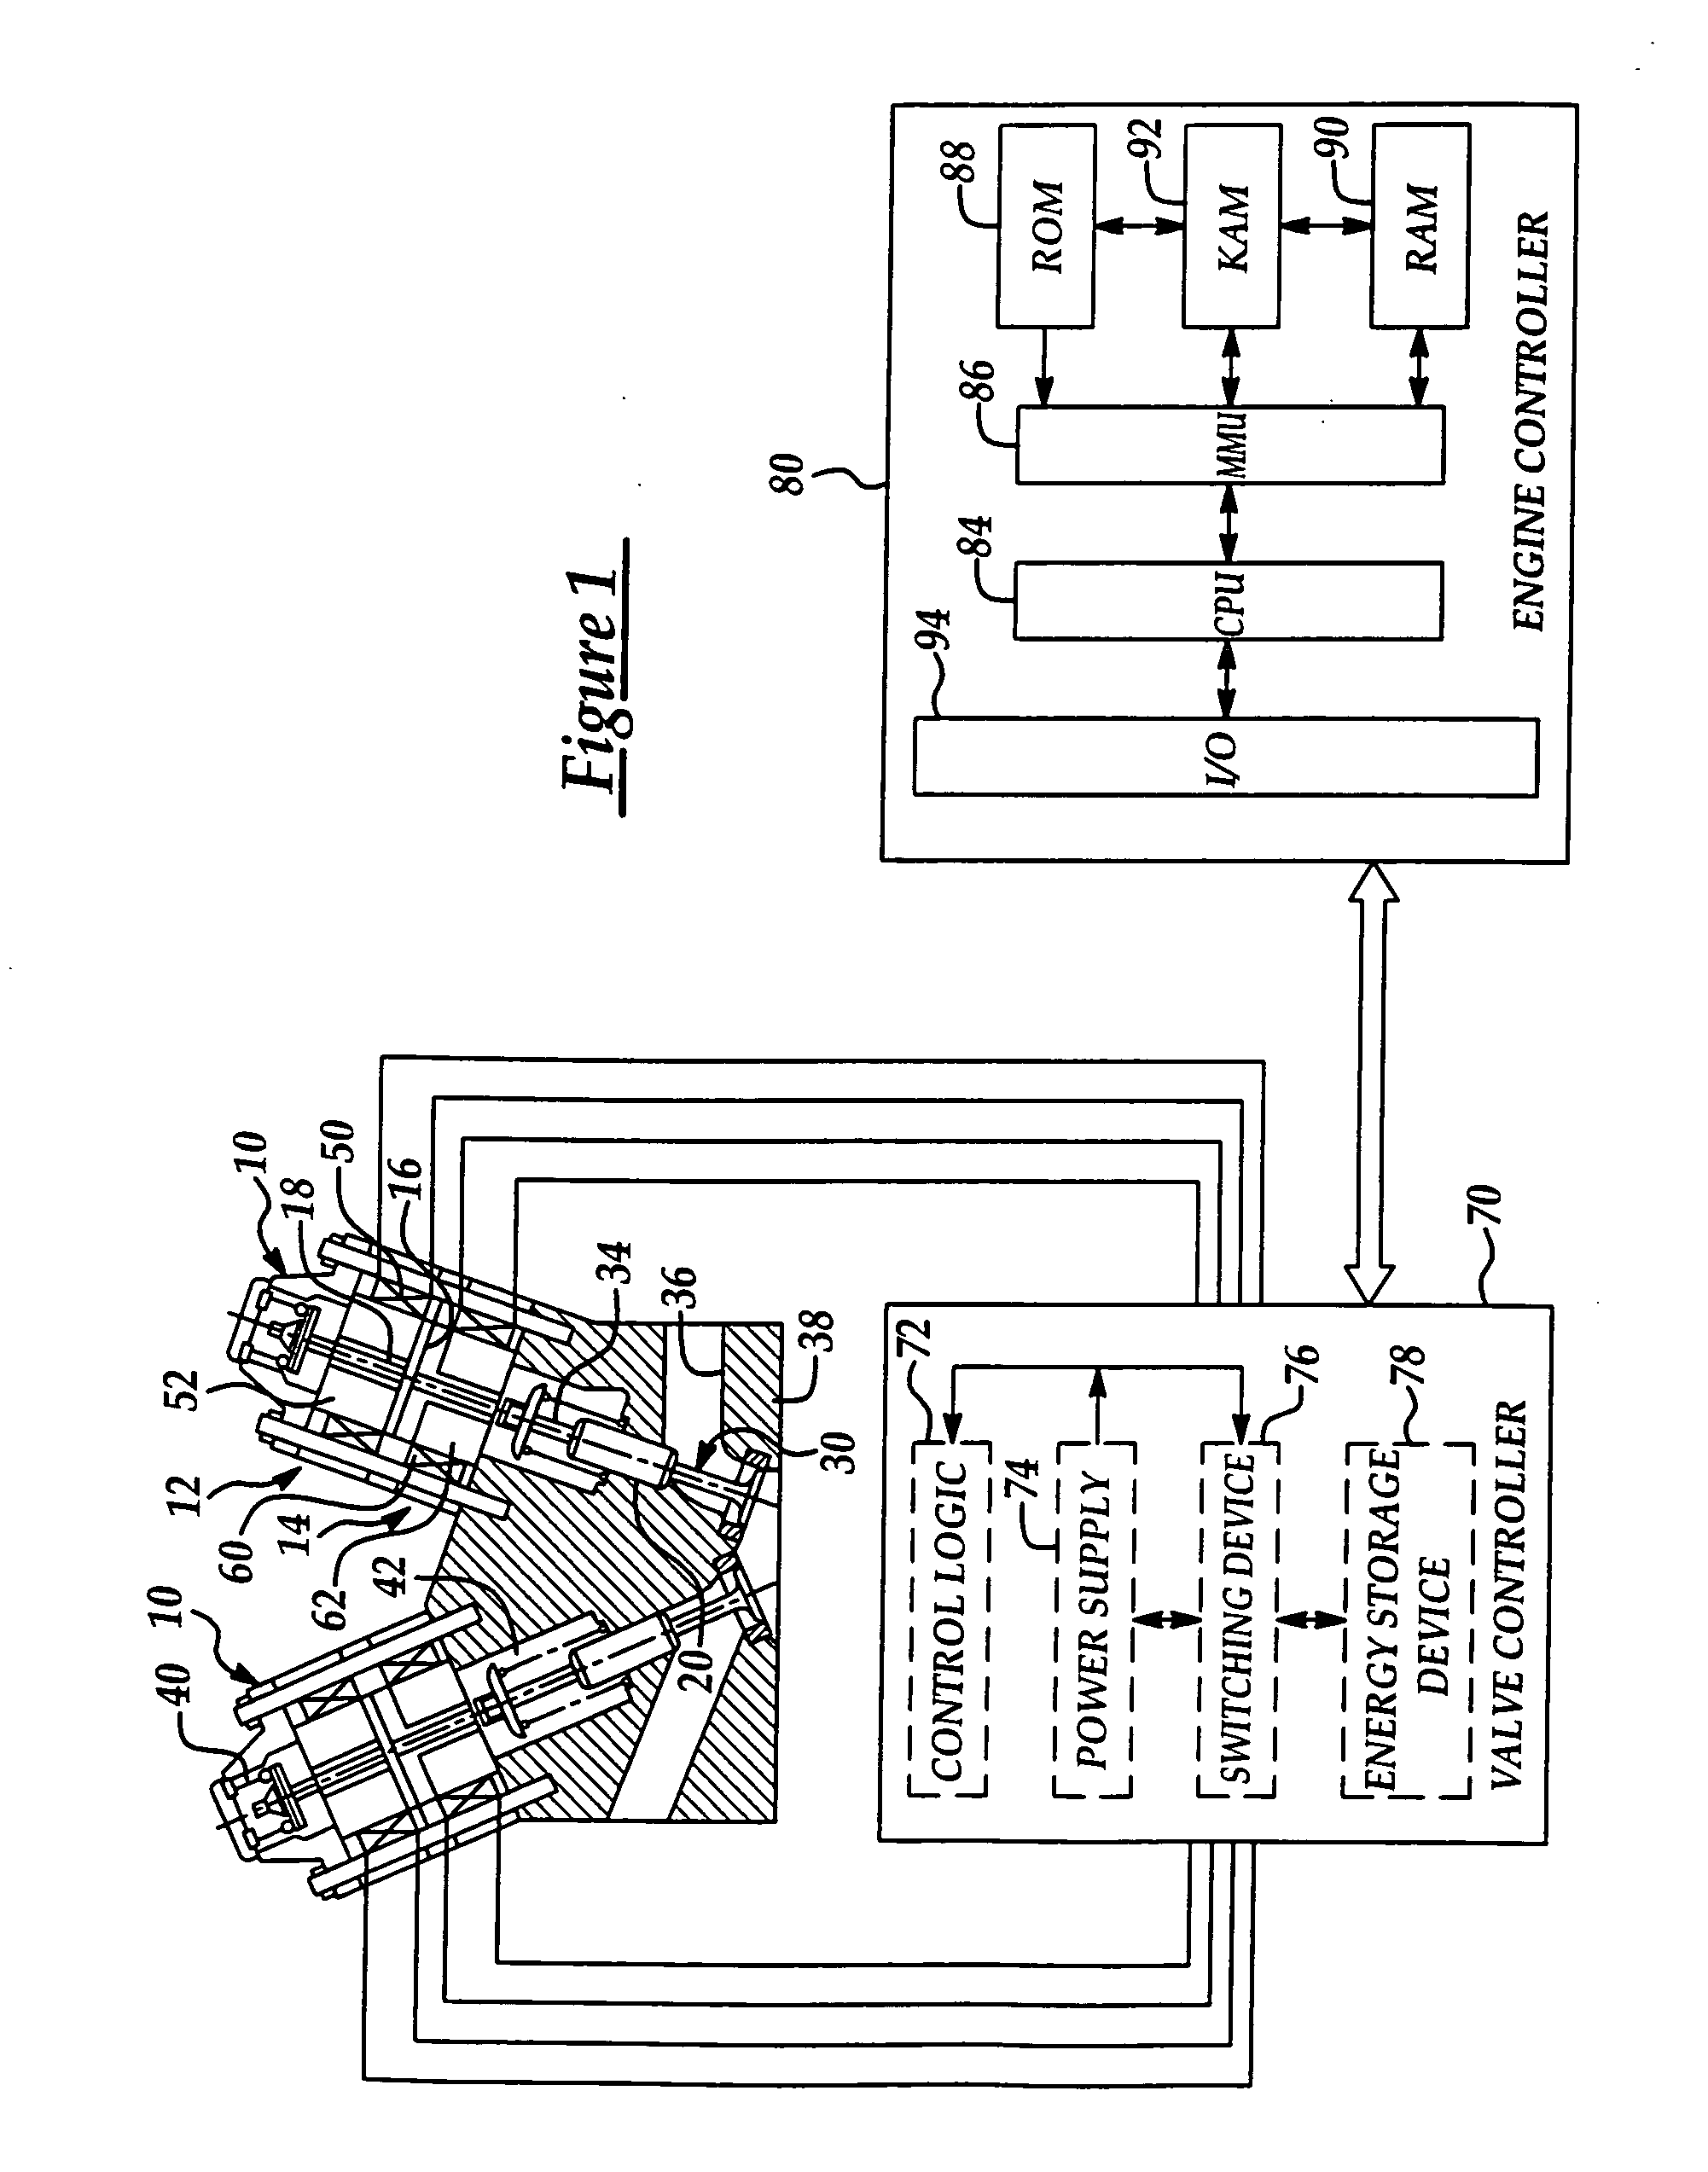 Electromagnetic valve actuation with series connected electromagnet coils